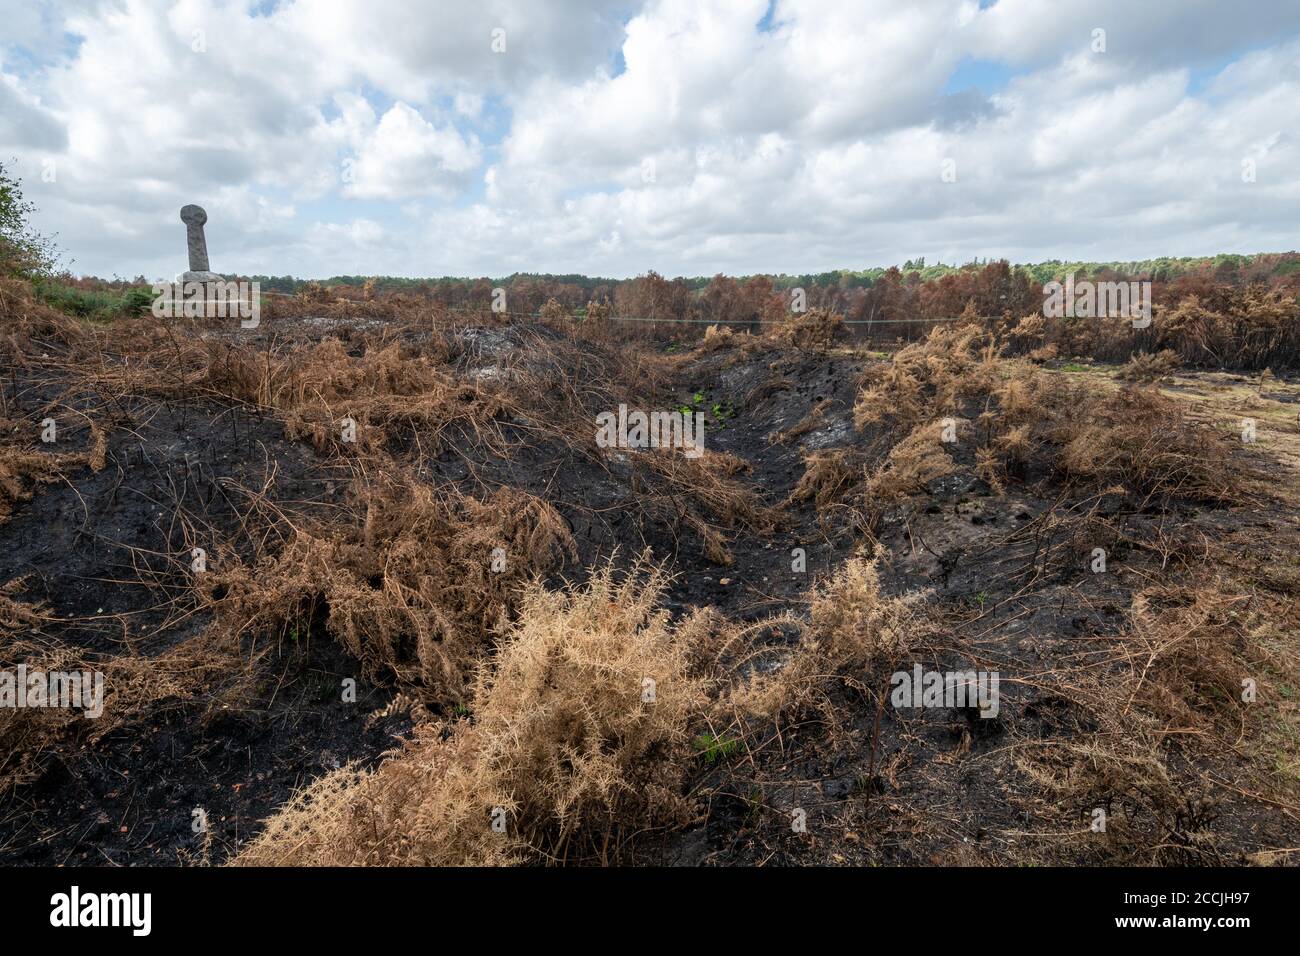 Aug 21, 2020. The aftermath of a large heathland fire or wildfire on Chobham Common in Surrey, UK, which started on Aug 7th 2020. Chobham Common is a National Nature Reserve and SSSI. The fire was a major incident and destroyed around 500 acres of lowland heath habitat of many rare wildlife species, including heathland birds, reptiles and invertebrates, and caused nearby homes to be evacuated. The cause remains unknown, but the heath was tinder dry during a record heatwave. Stock Photo